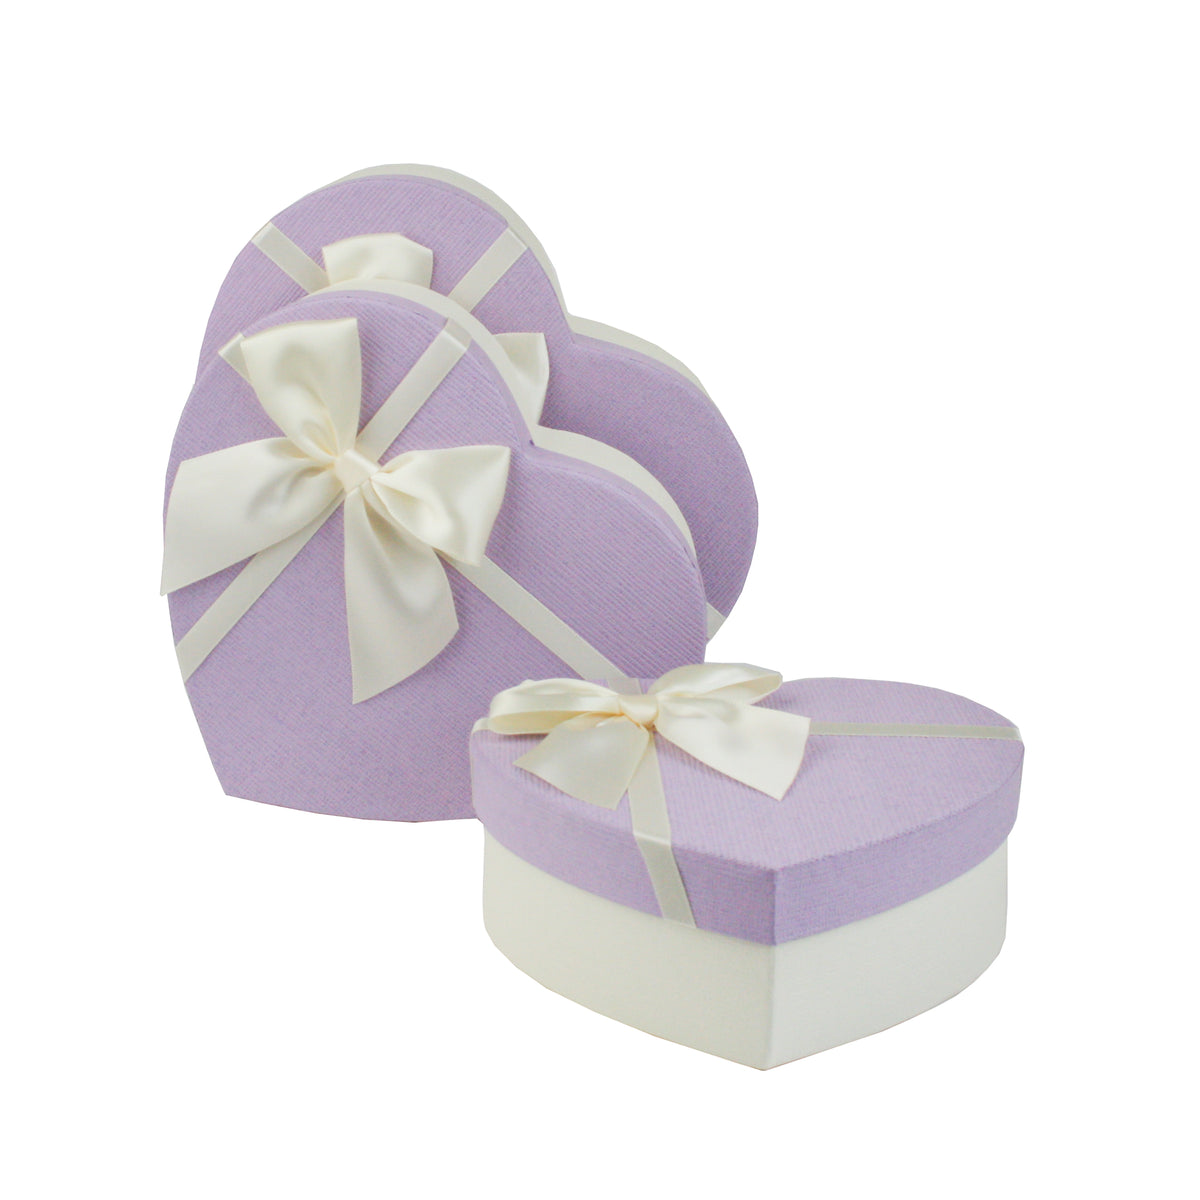 Luxury Heart Shaped White/Lilac Gift Boxes - Set of 3